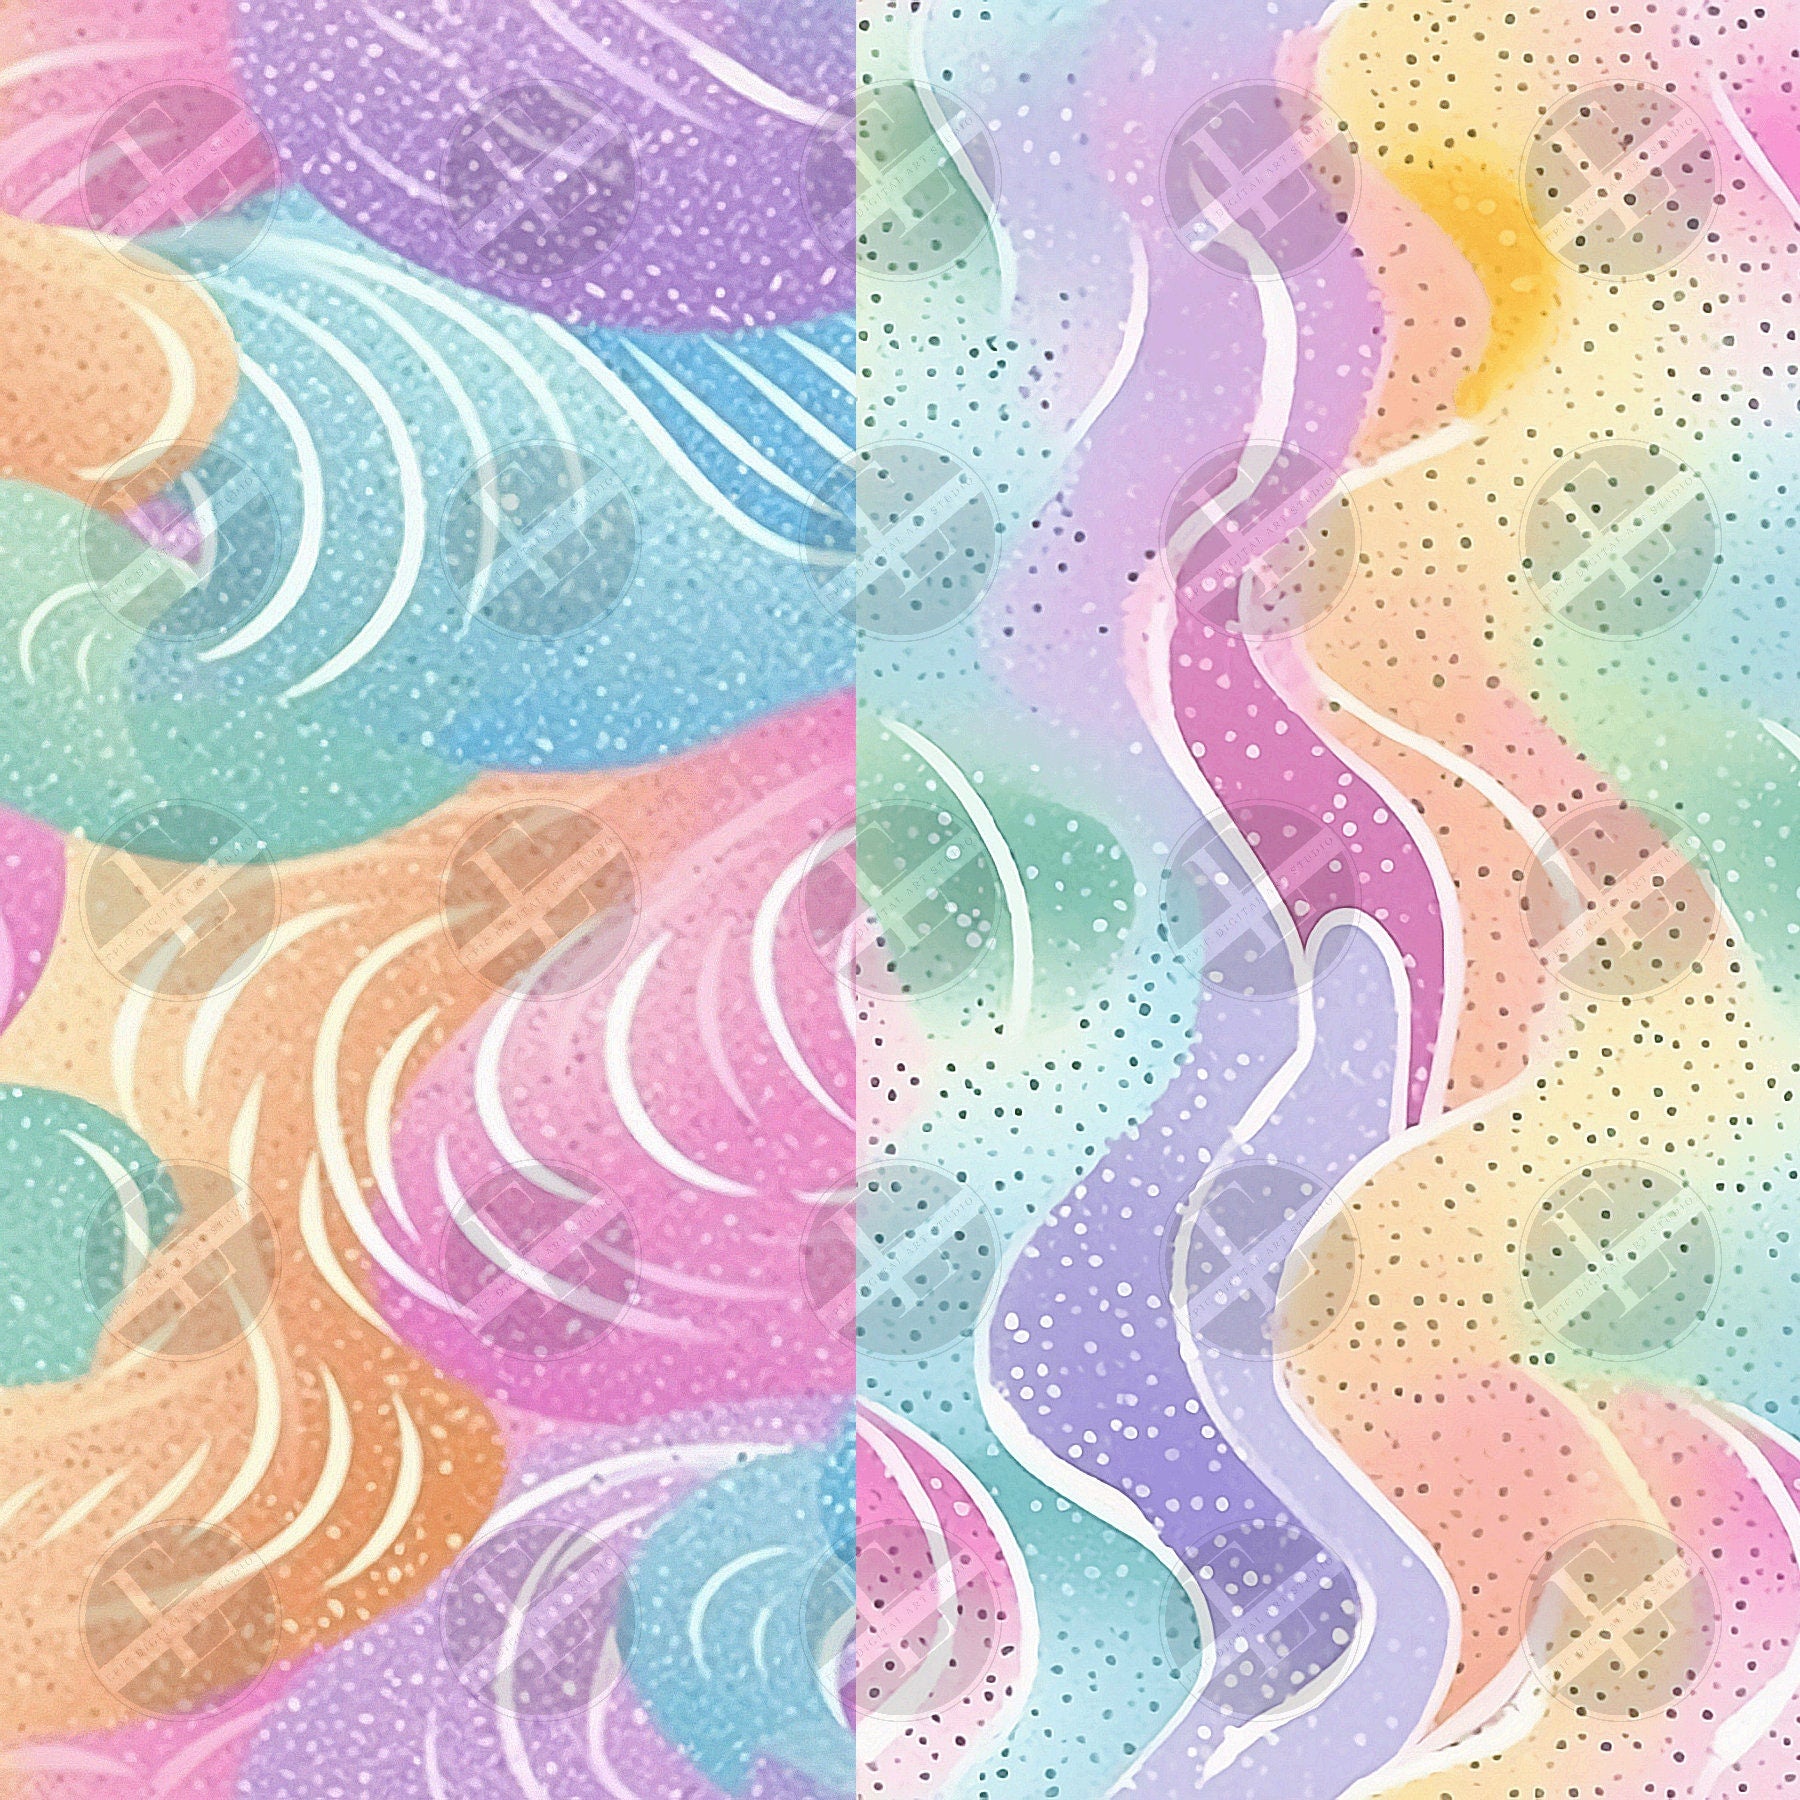 Boho Rainbow Swirl Seamless Patterns Digital Download PNG - Bundle of 18 - Pastel Dotted Watercolor Patterns - Commercial & Personal Use